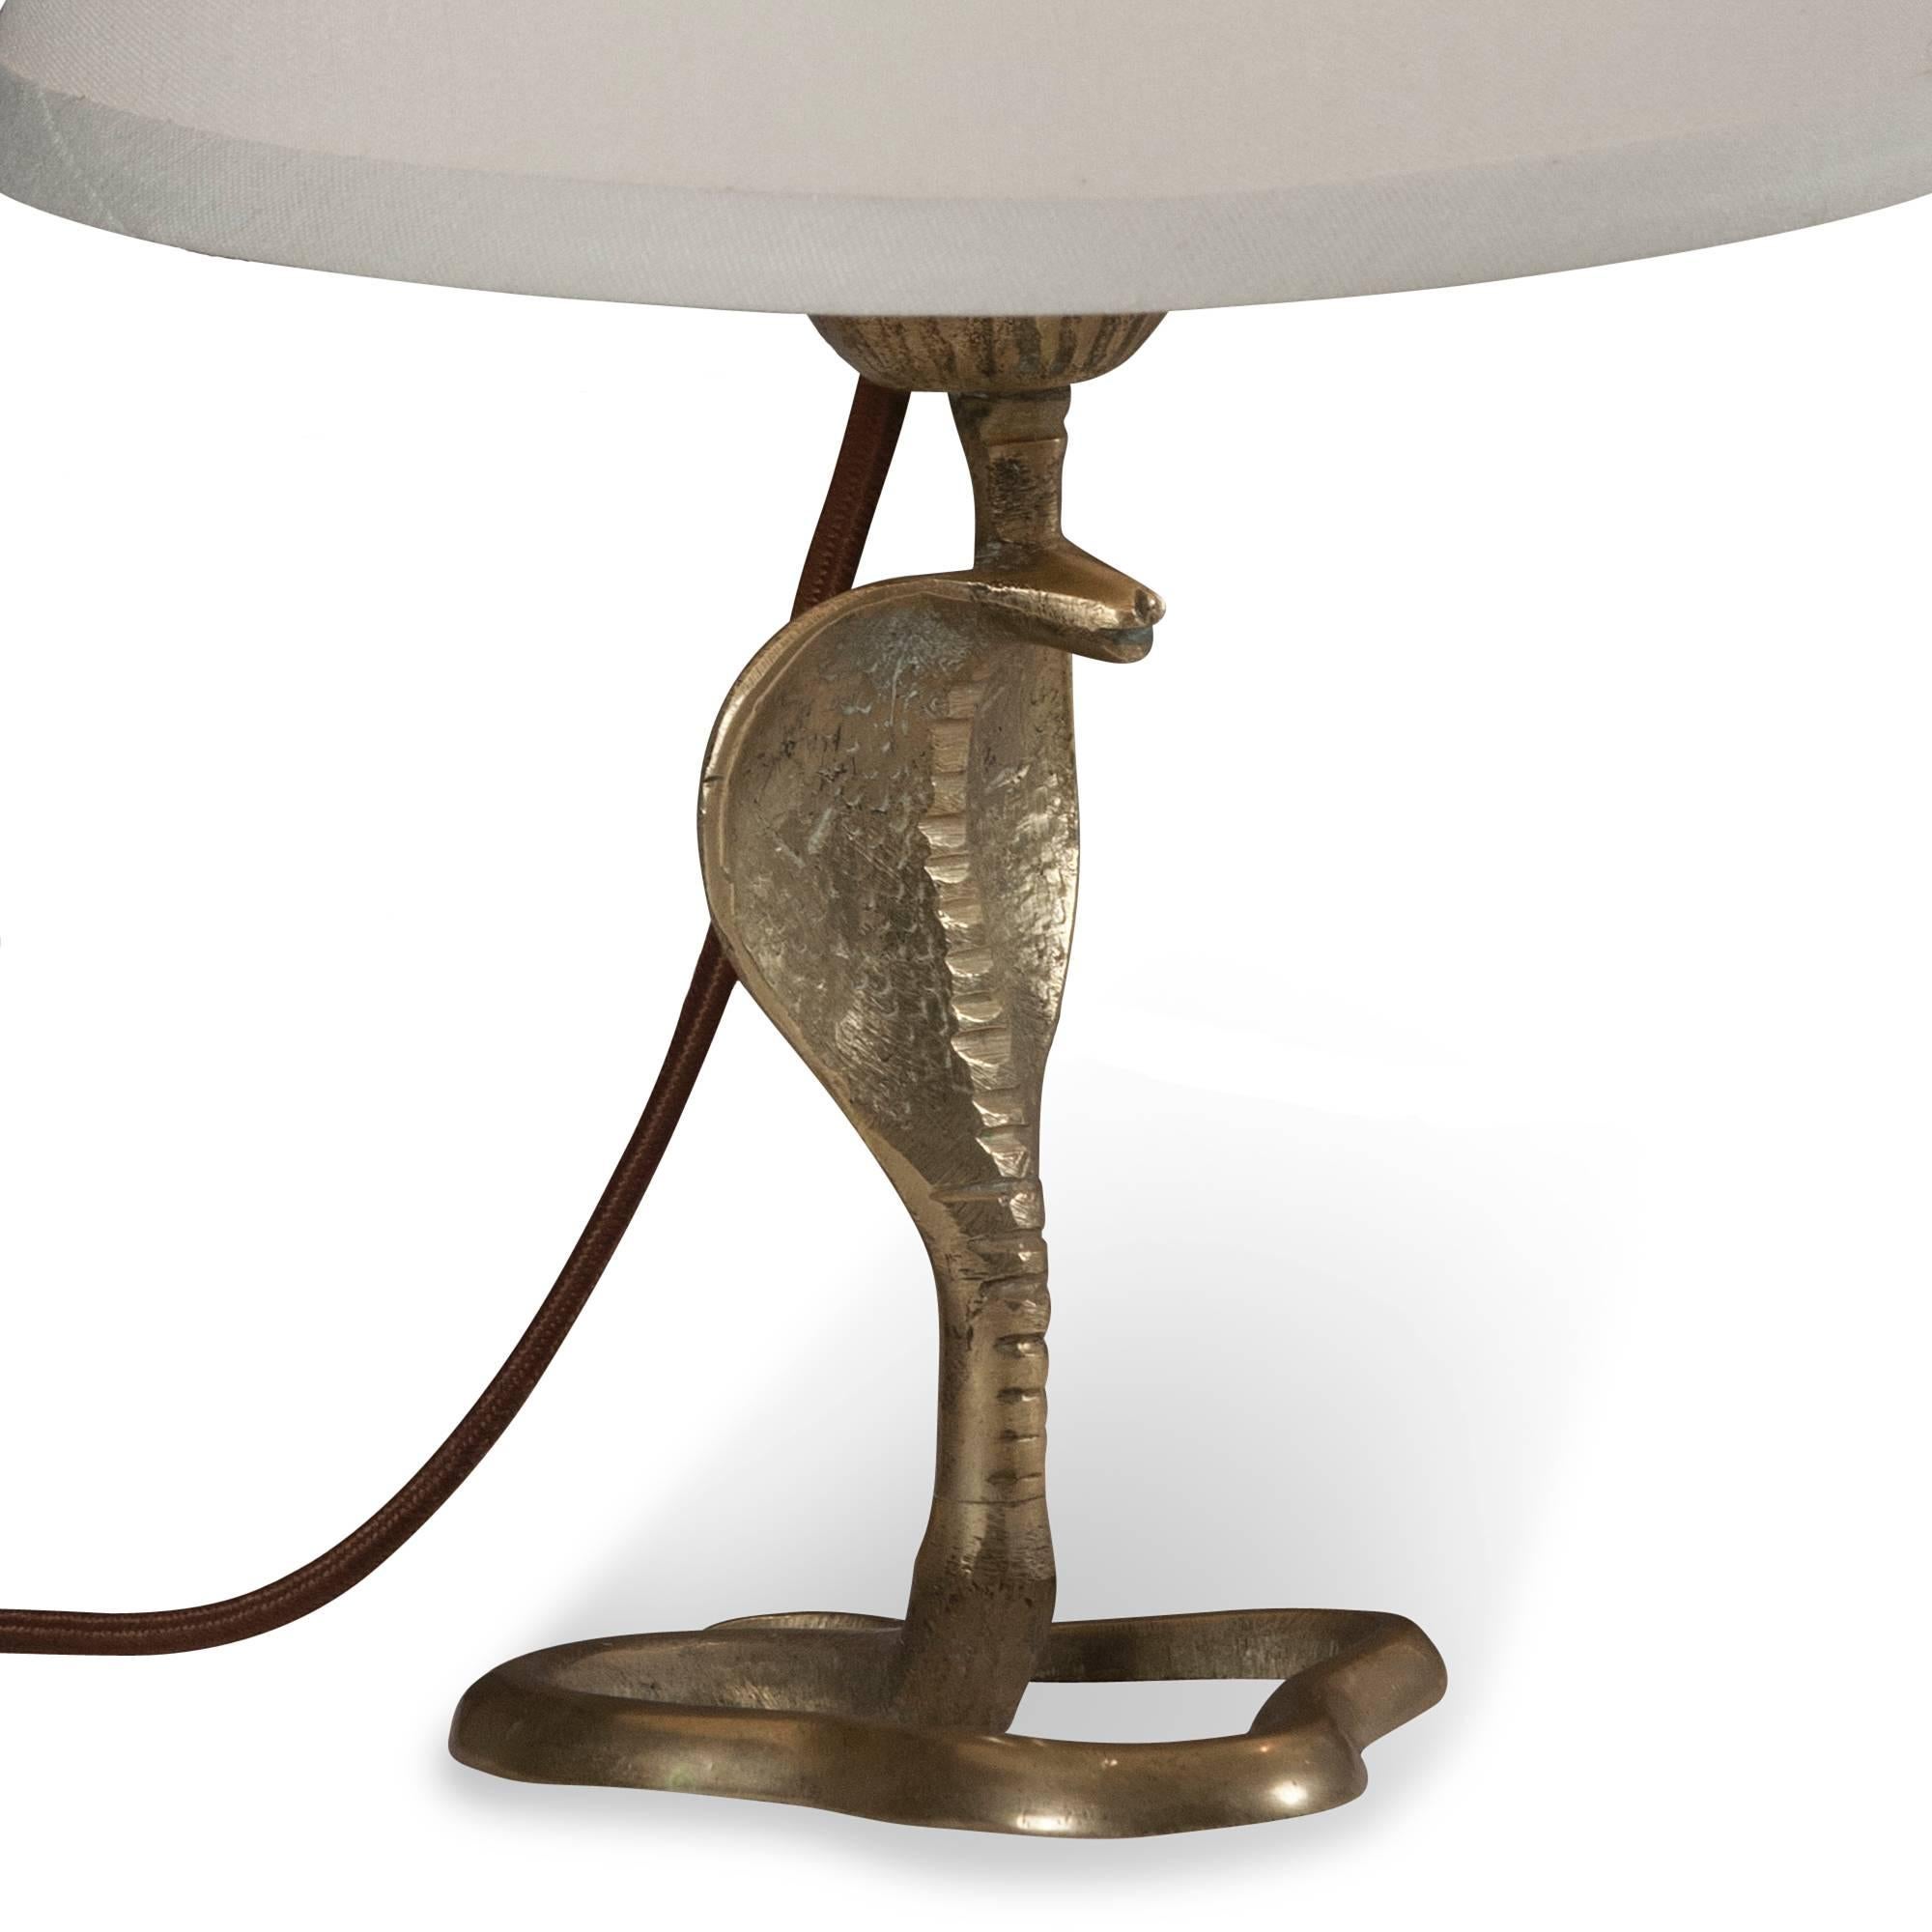 Pair of bronze cobra form table lamps, the serpent standing with hood open and body loosely coiled, French, 1930s. In custom silk shades. Overall height 14 in, base measures 4 in x 4 1/4 in, shade measures top diameter 5 1/2 in, bottom diameter 8